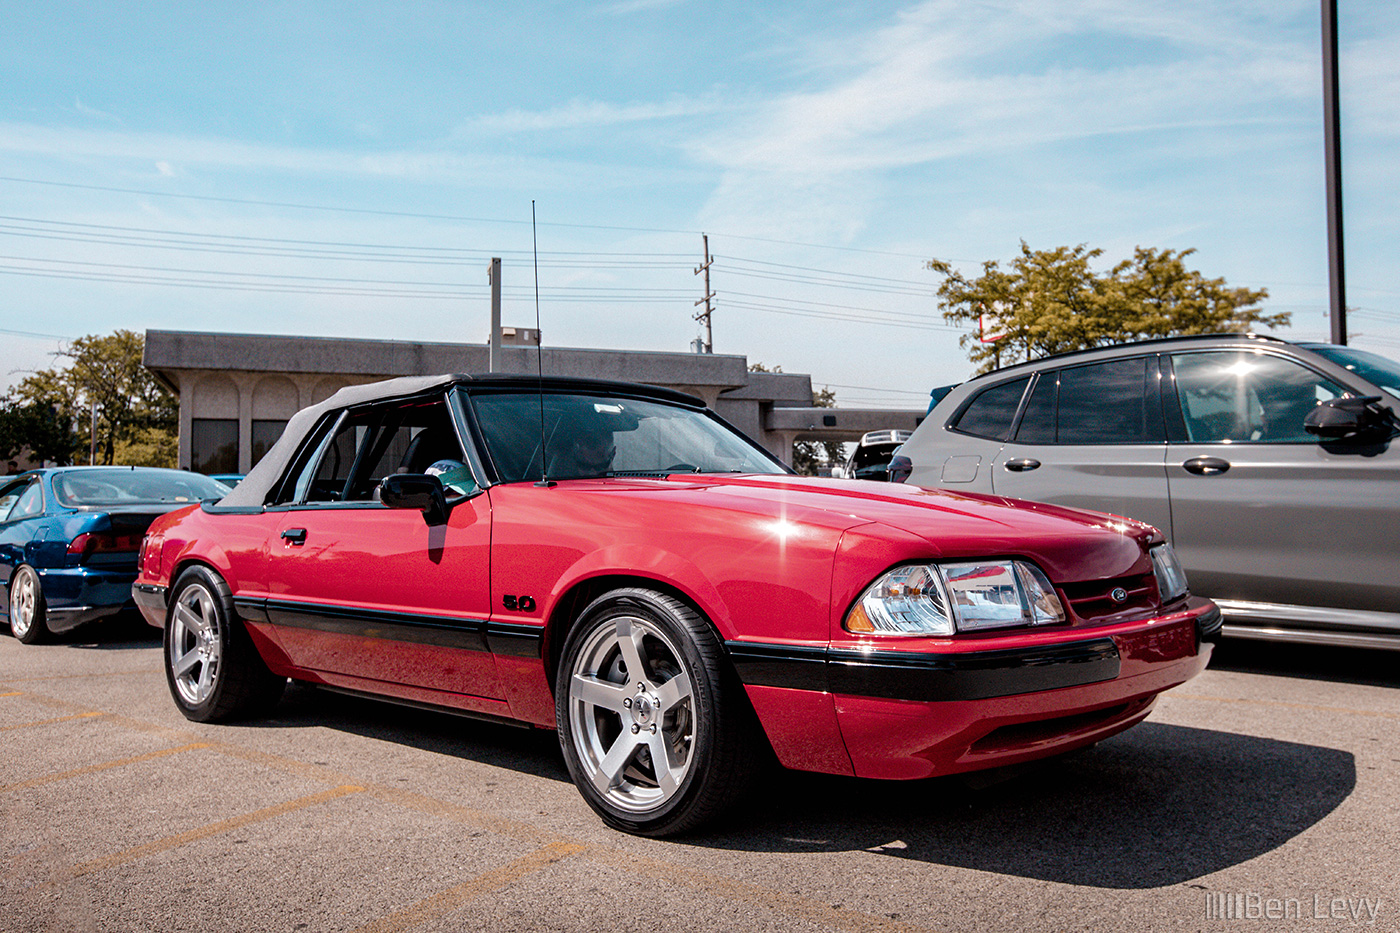 Red Ford Mustang Convertible at Premier Lounge in Glenview